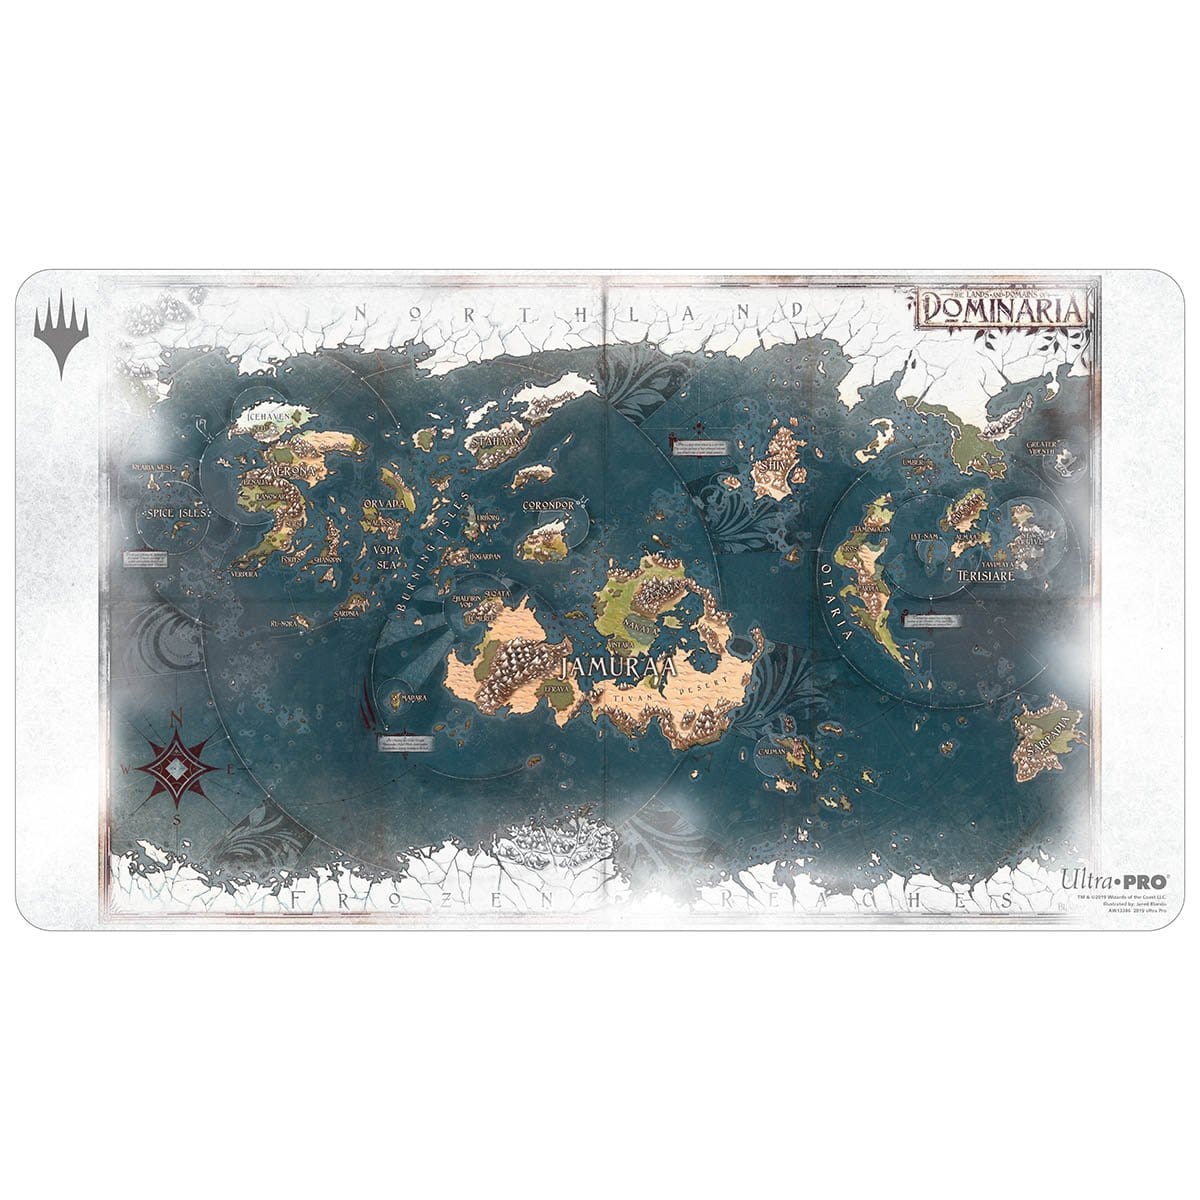 Dominaria Map Playmat - Playmat - Original Magic Art - Accessories for Magic the Gathering and other card games